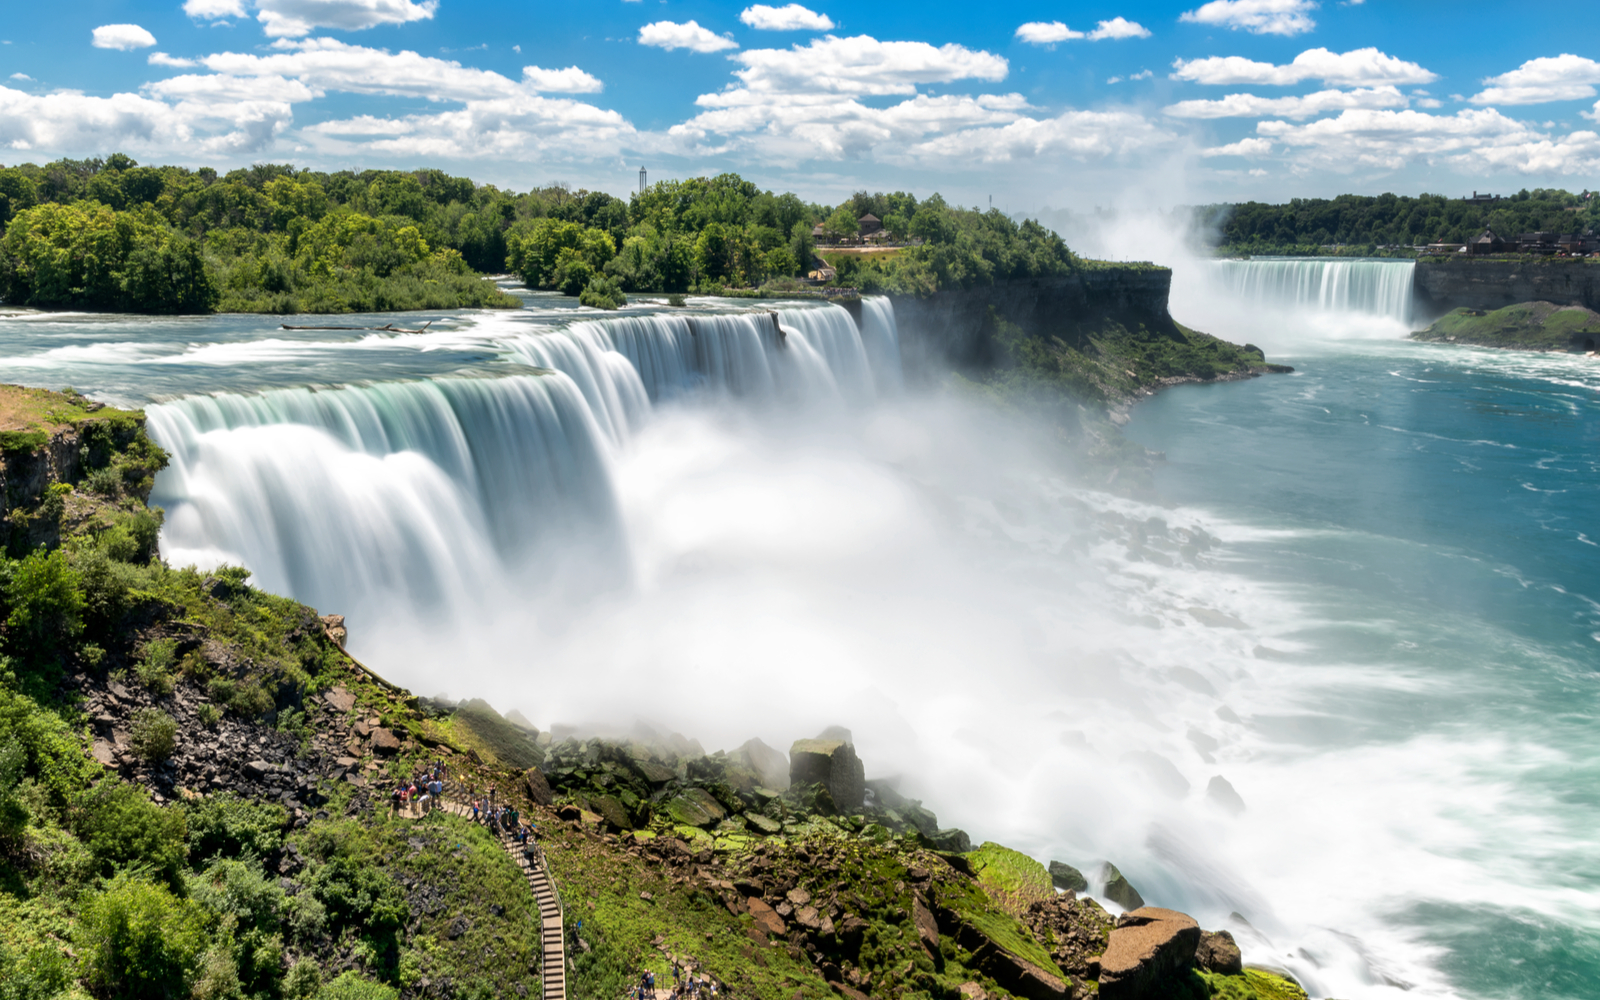 The Best Time to Visit Niagara Falls in 2022